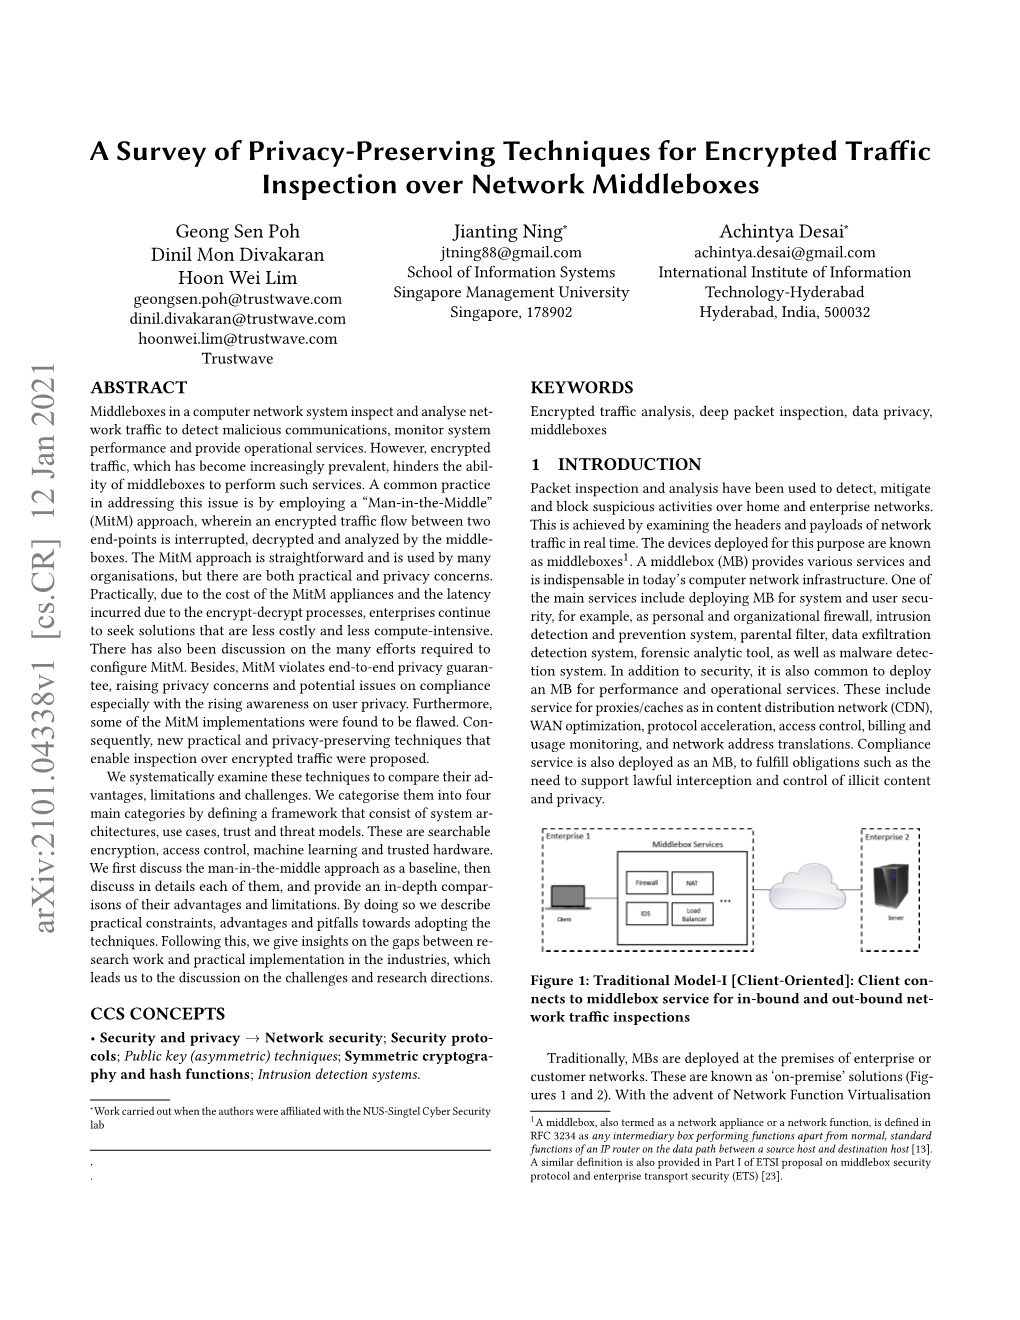 A Survey of Privacy-Preserving Techniques for Encrypted Traffic Inspection Over Network Middleboxes